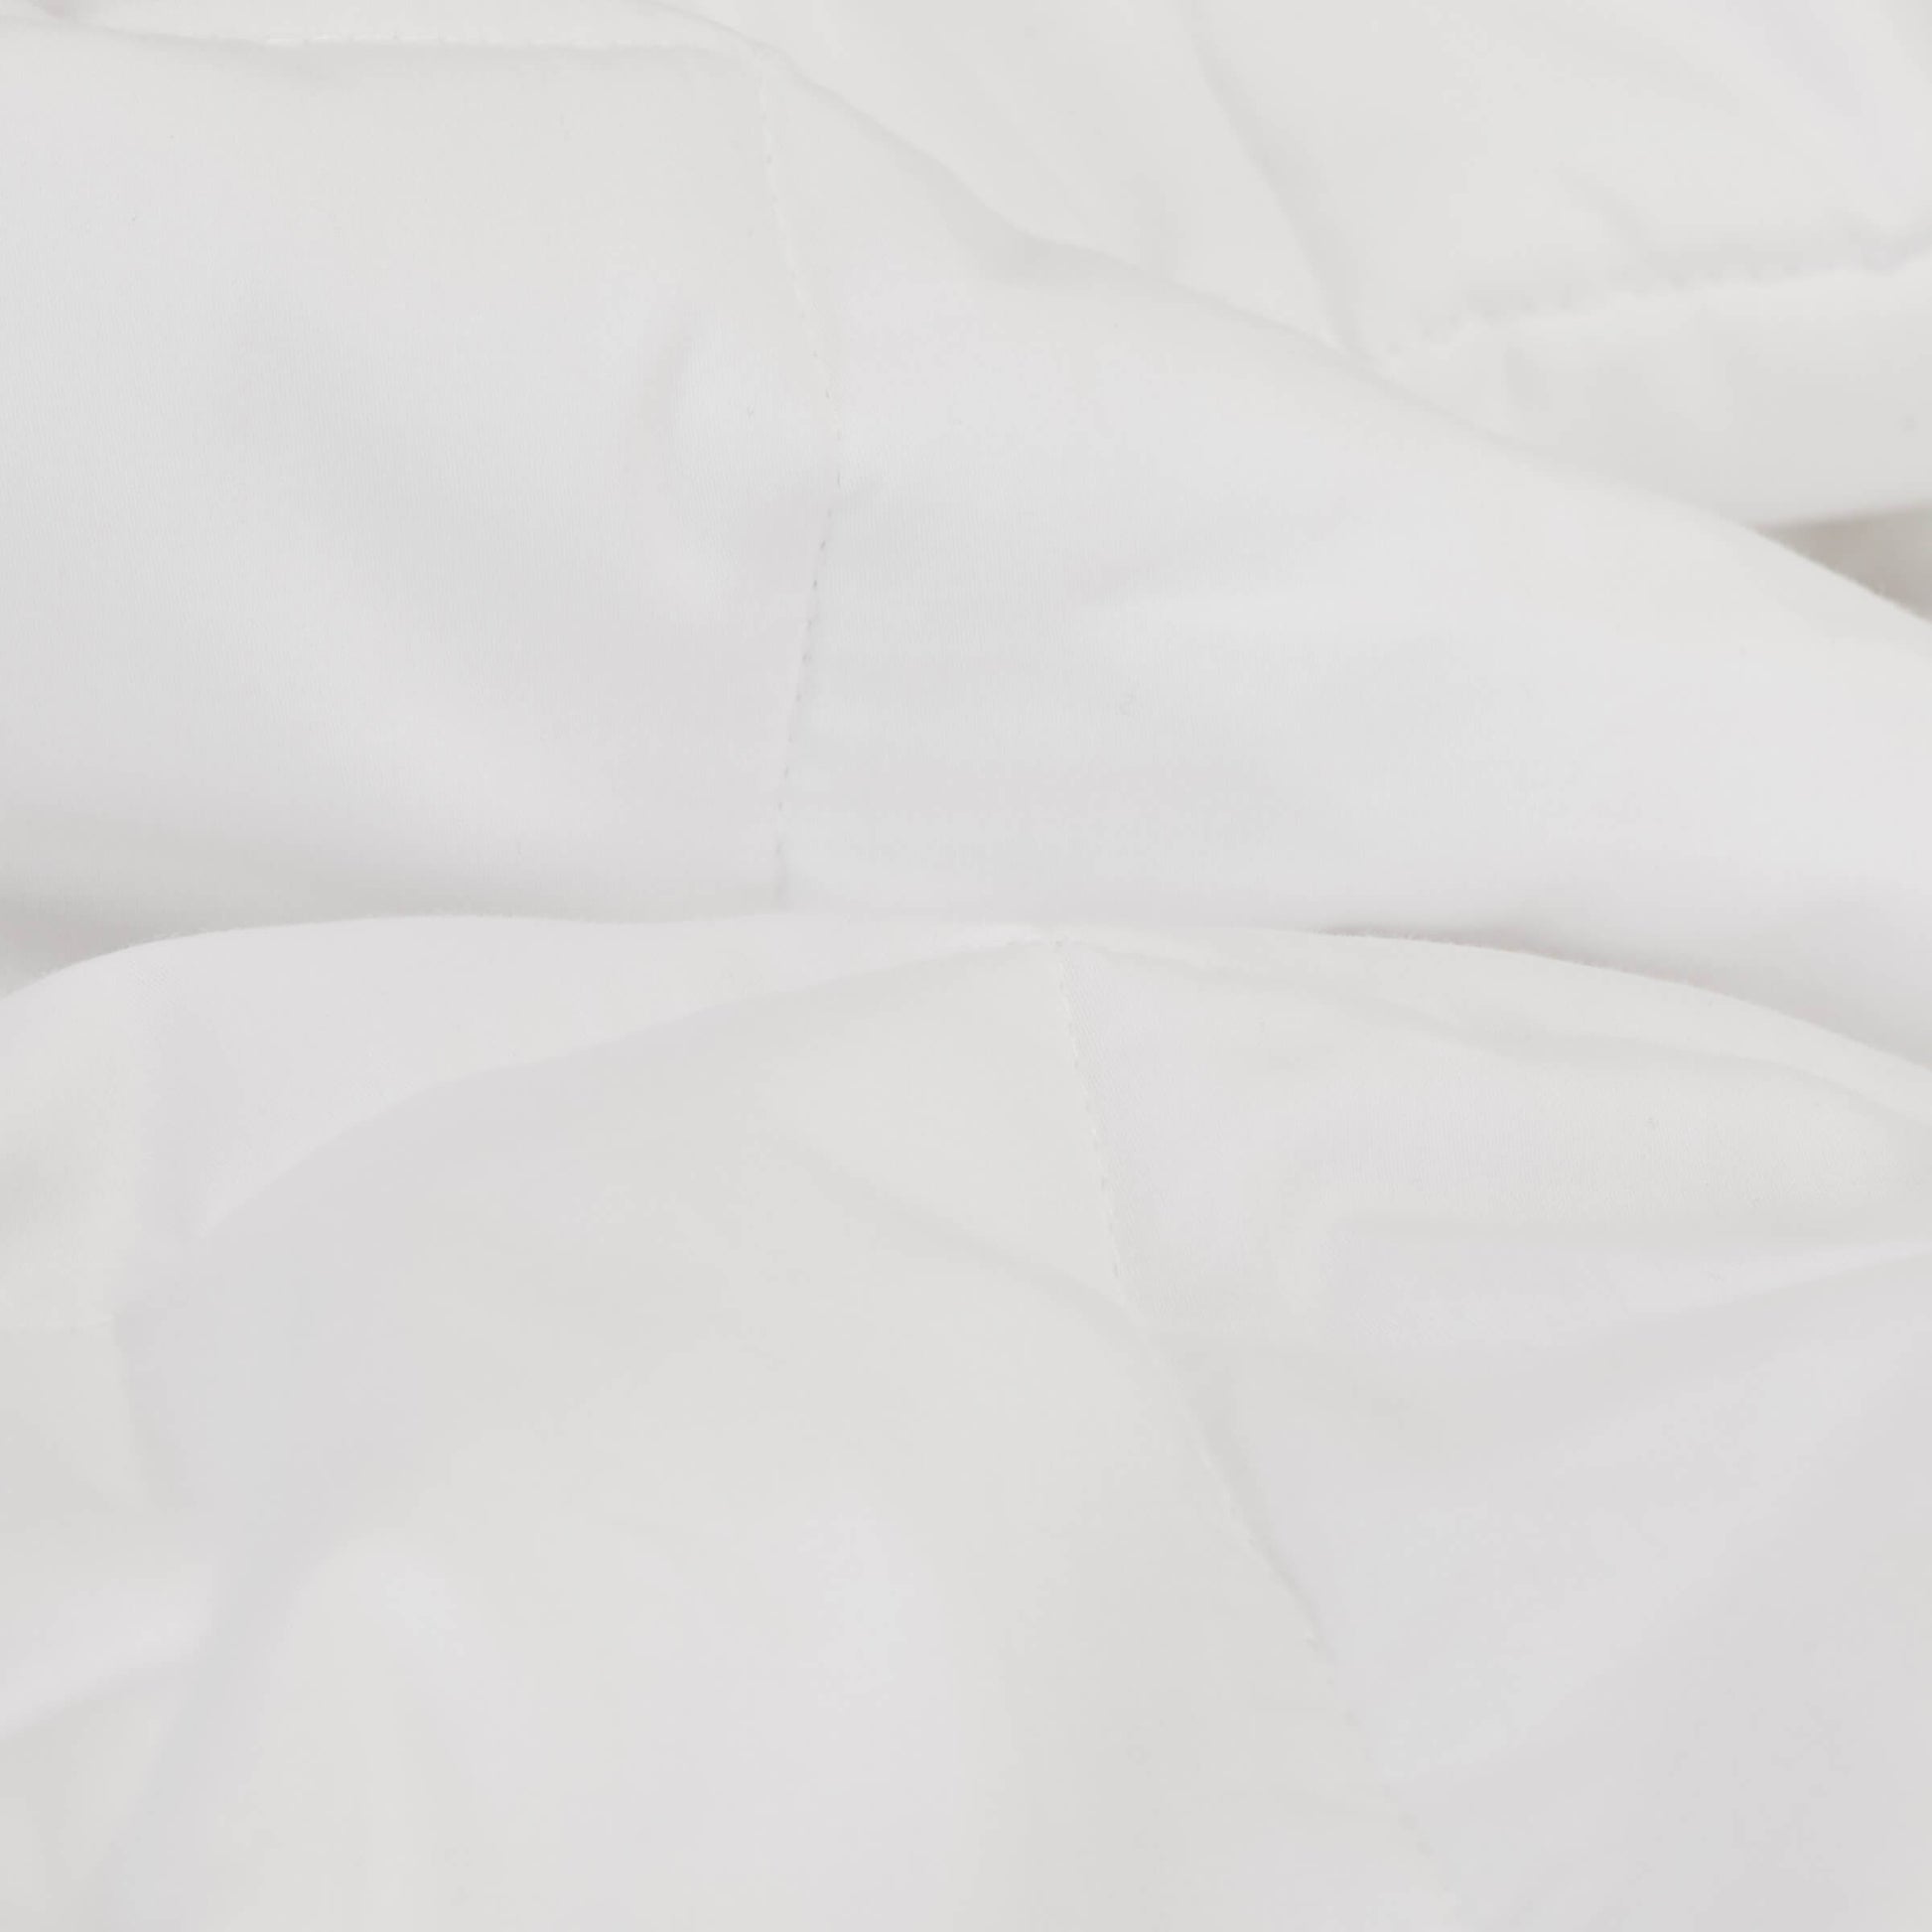 A detailed view of the Slumber Cloud Comforter fabric with temperature regulating technology